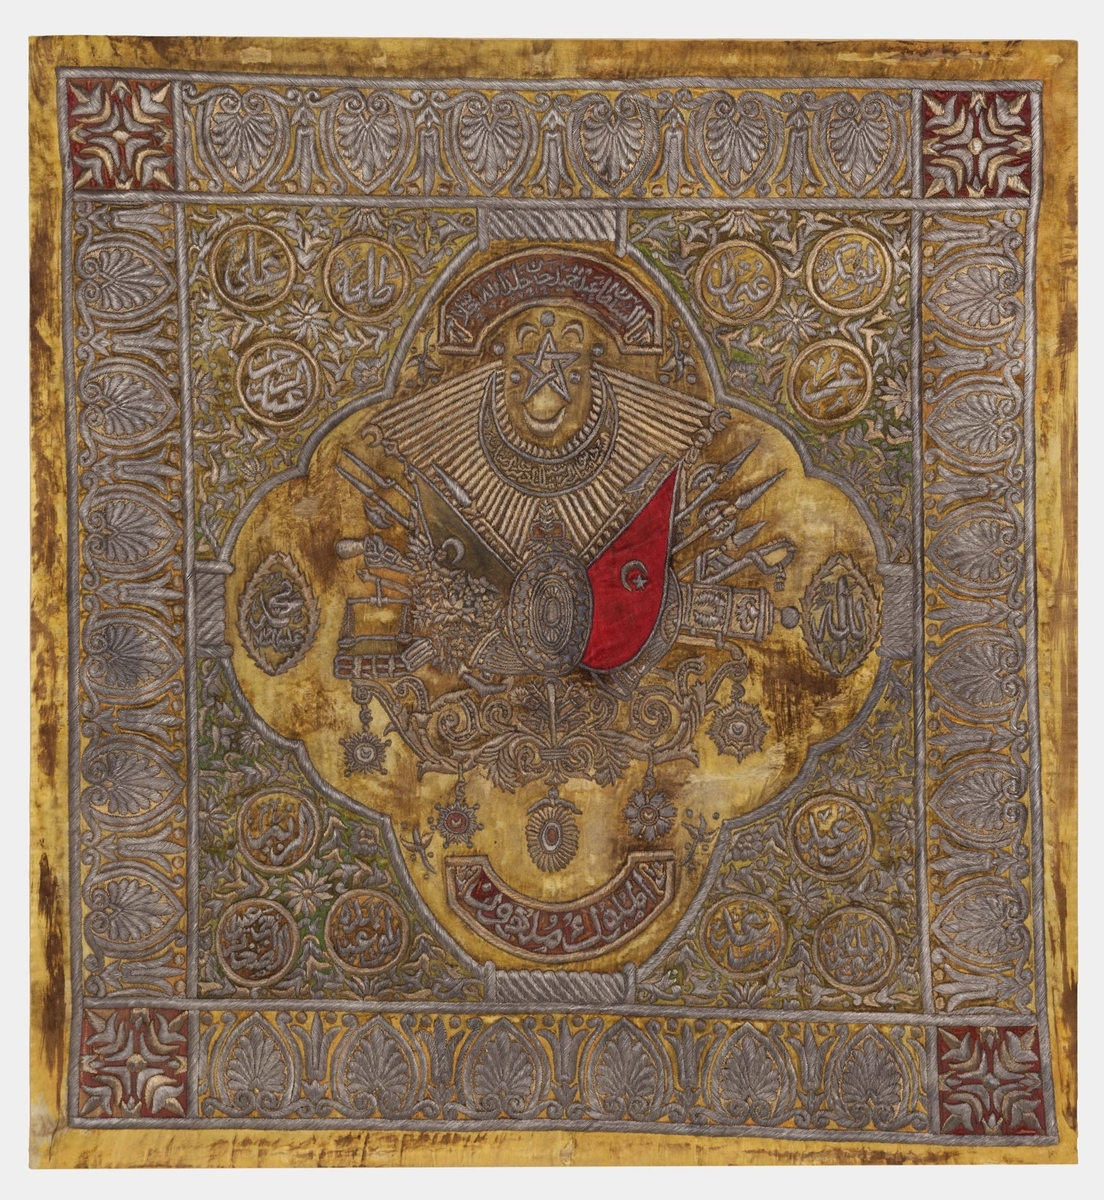 Banner with the Ottoman Coat of Arms